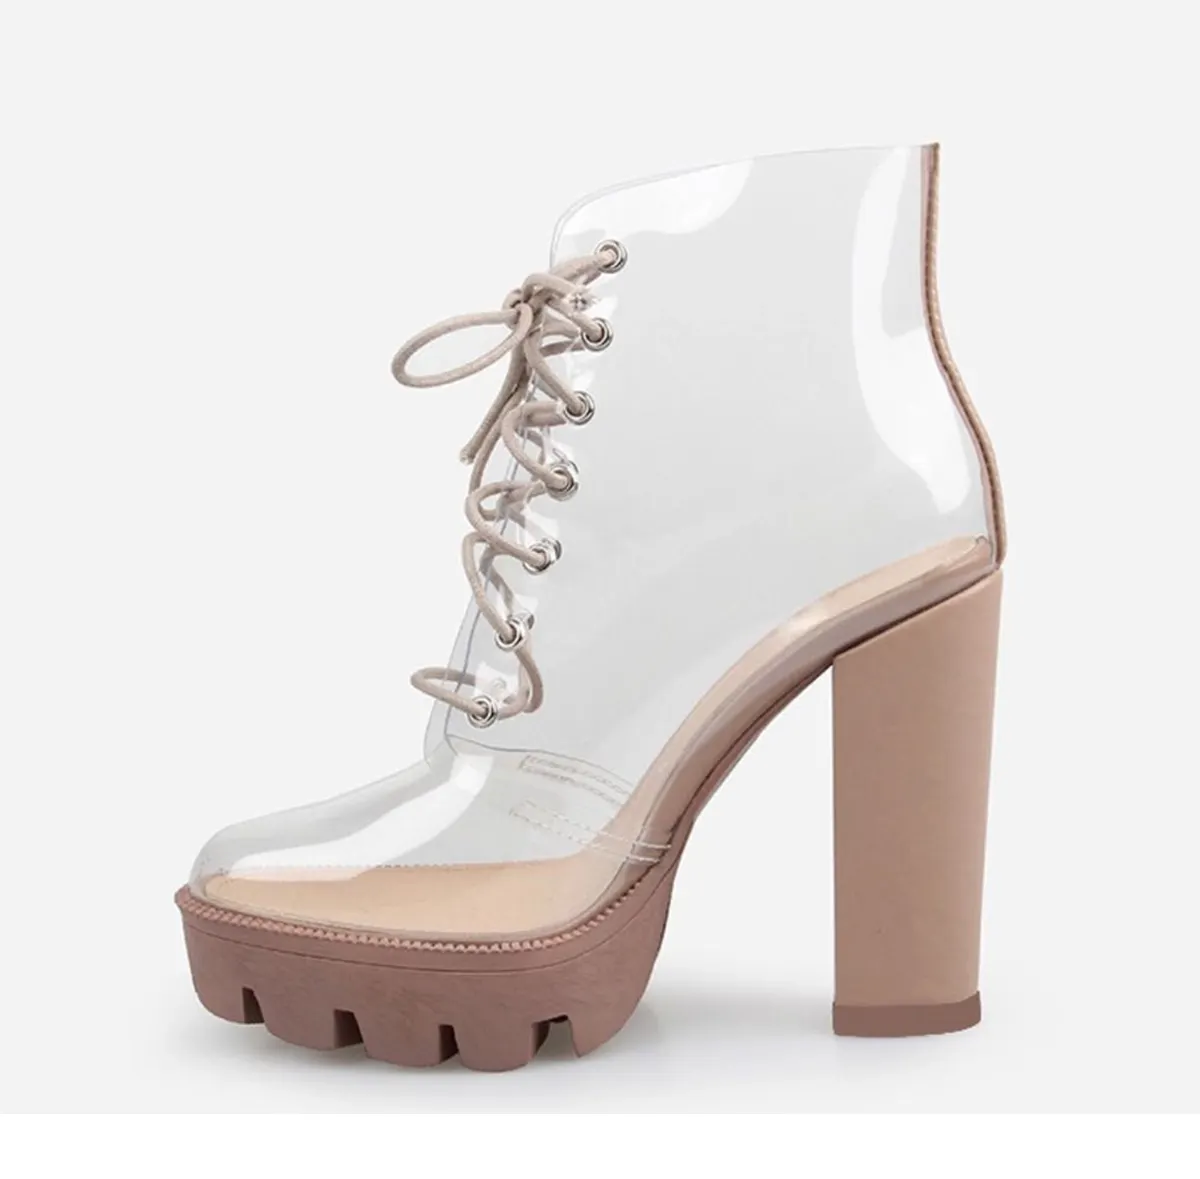 2019 New Transparent Pvc Clear High Heels Ankle Women boots